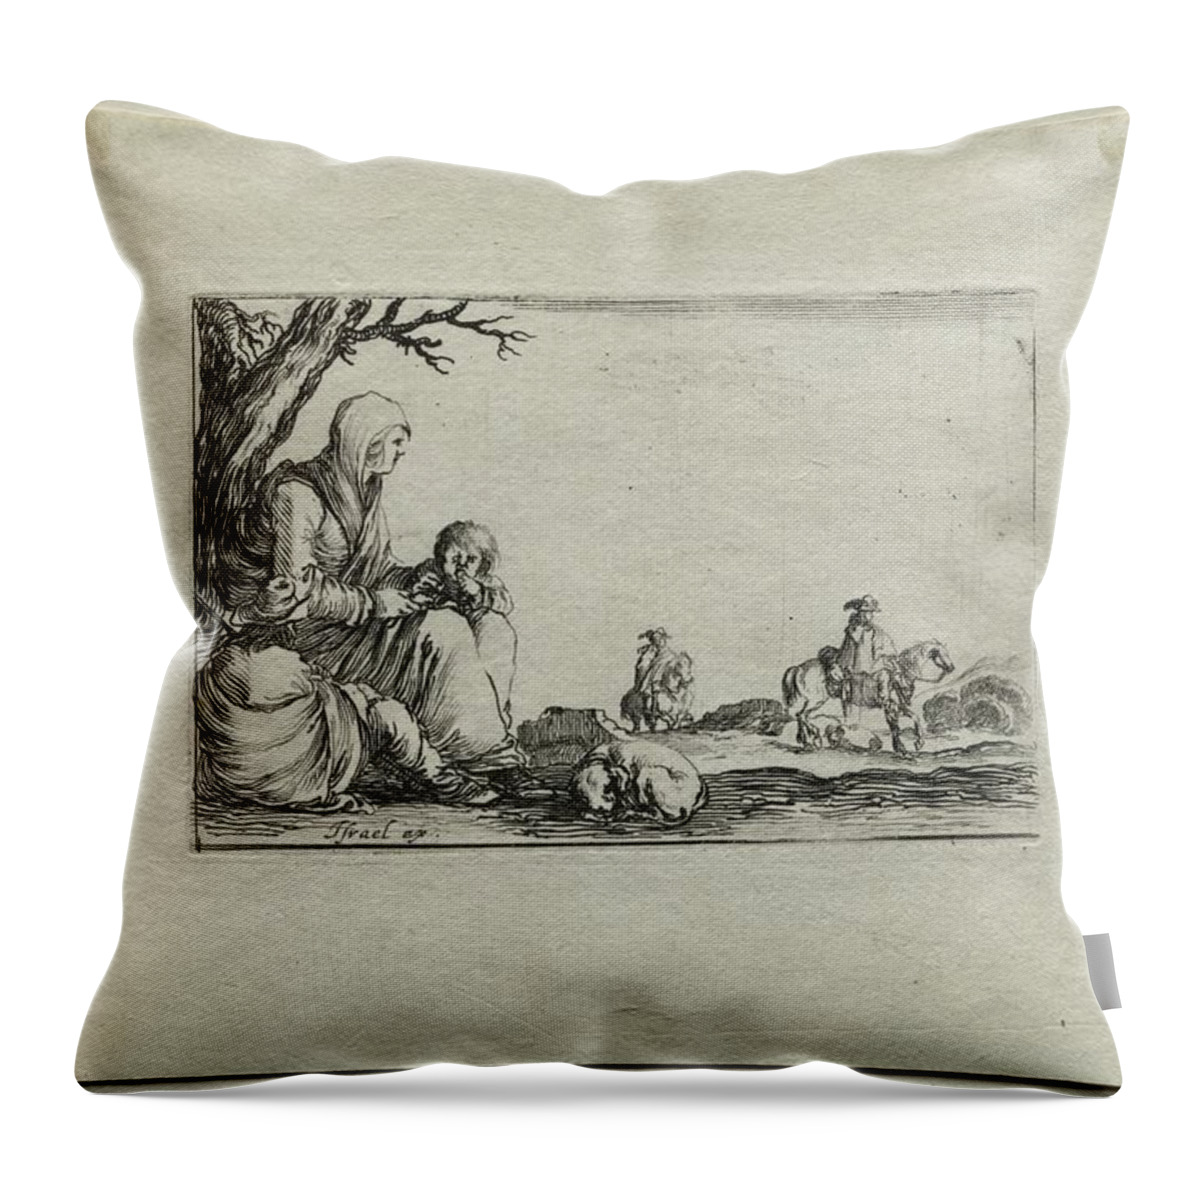 Antique Throw Pillow featuring the painting Caprices Seated Beggar Woman with Two Children c. 1642 Stefano Della Bella by MotionAge Designs